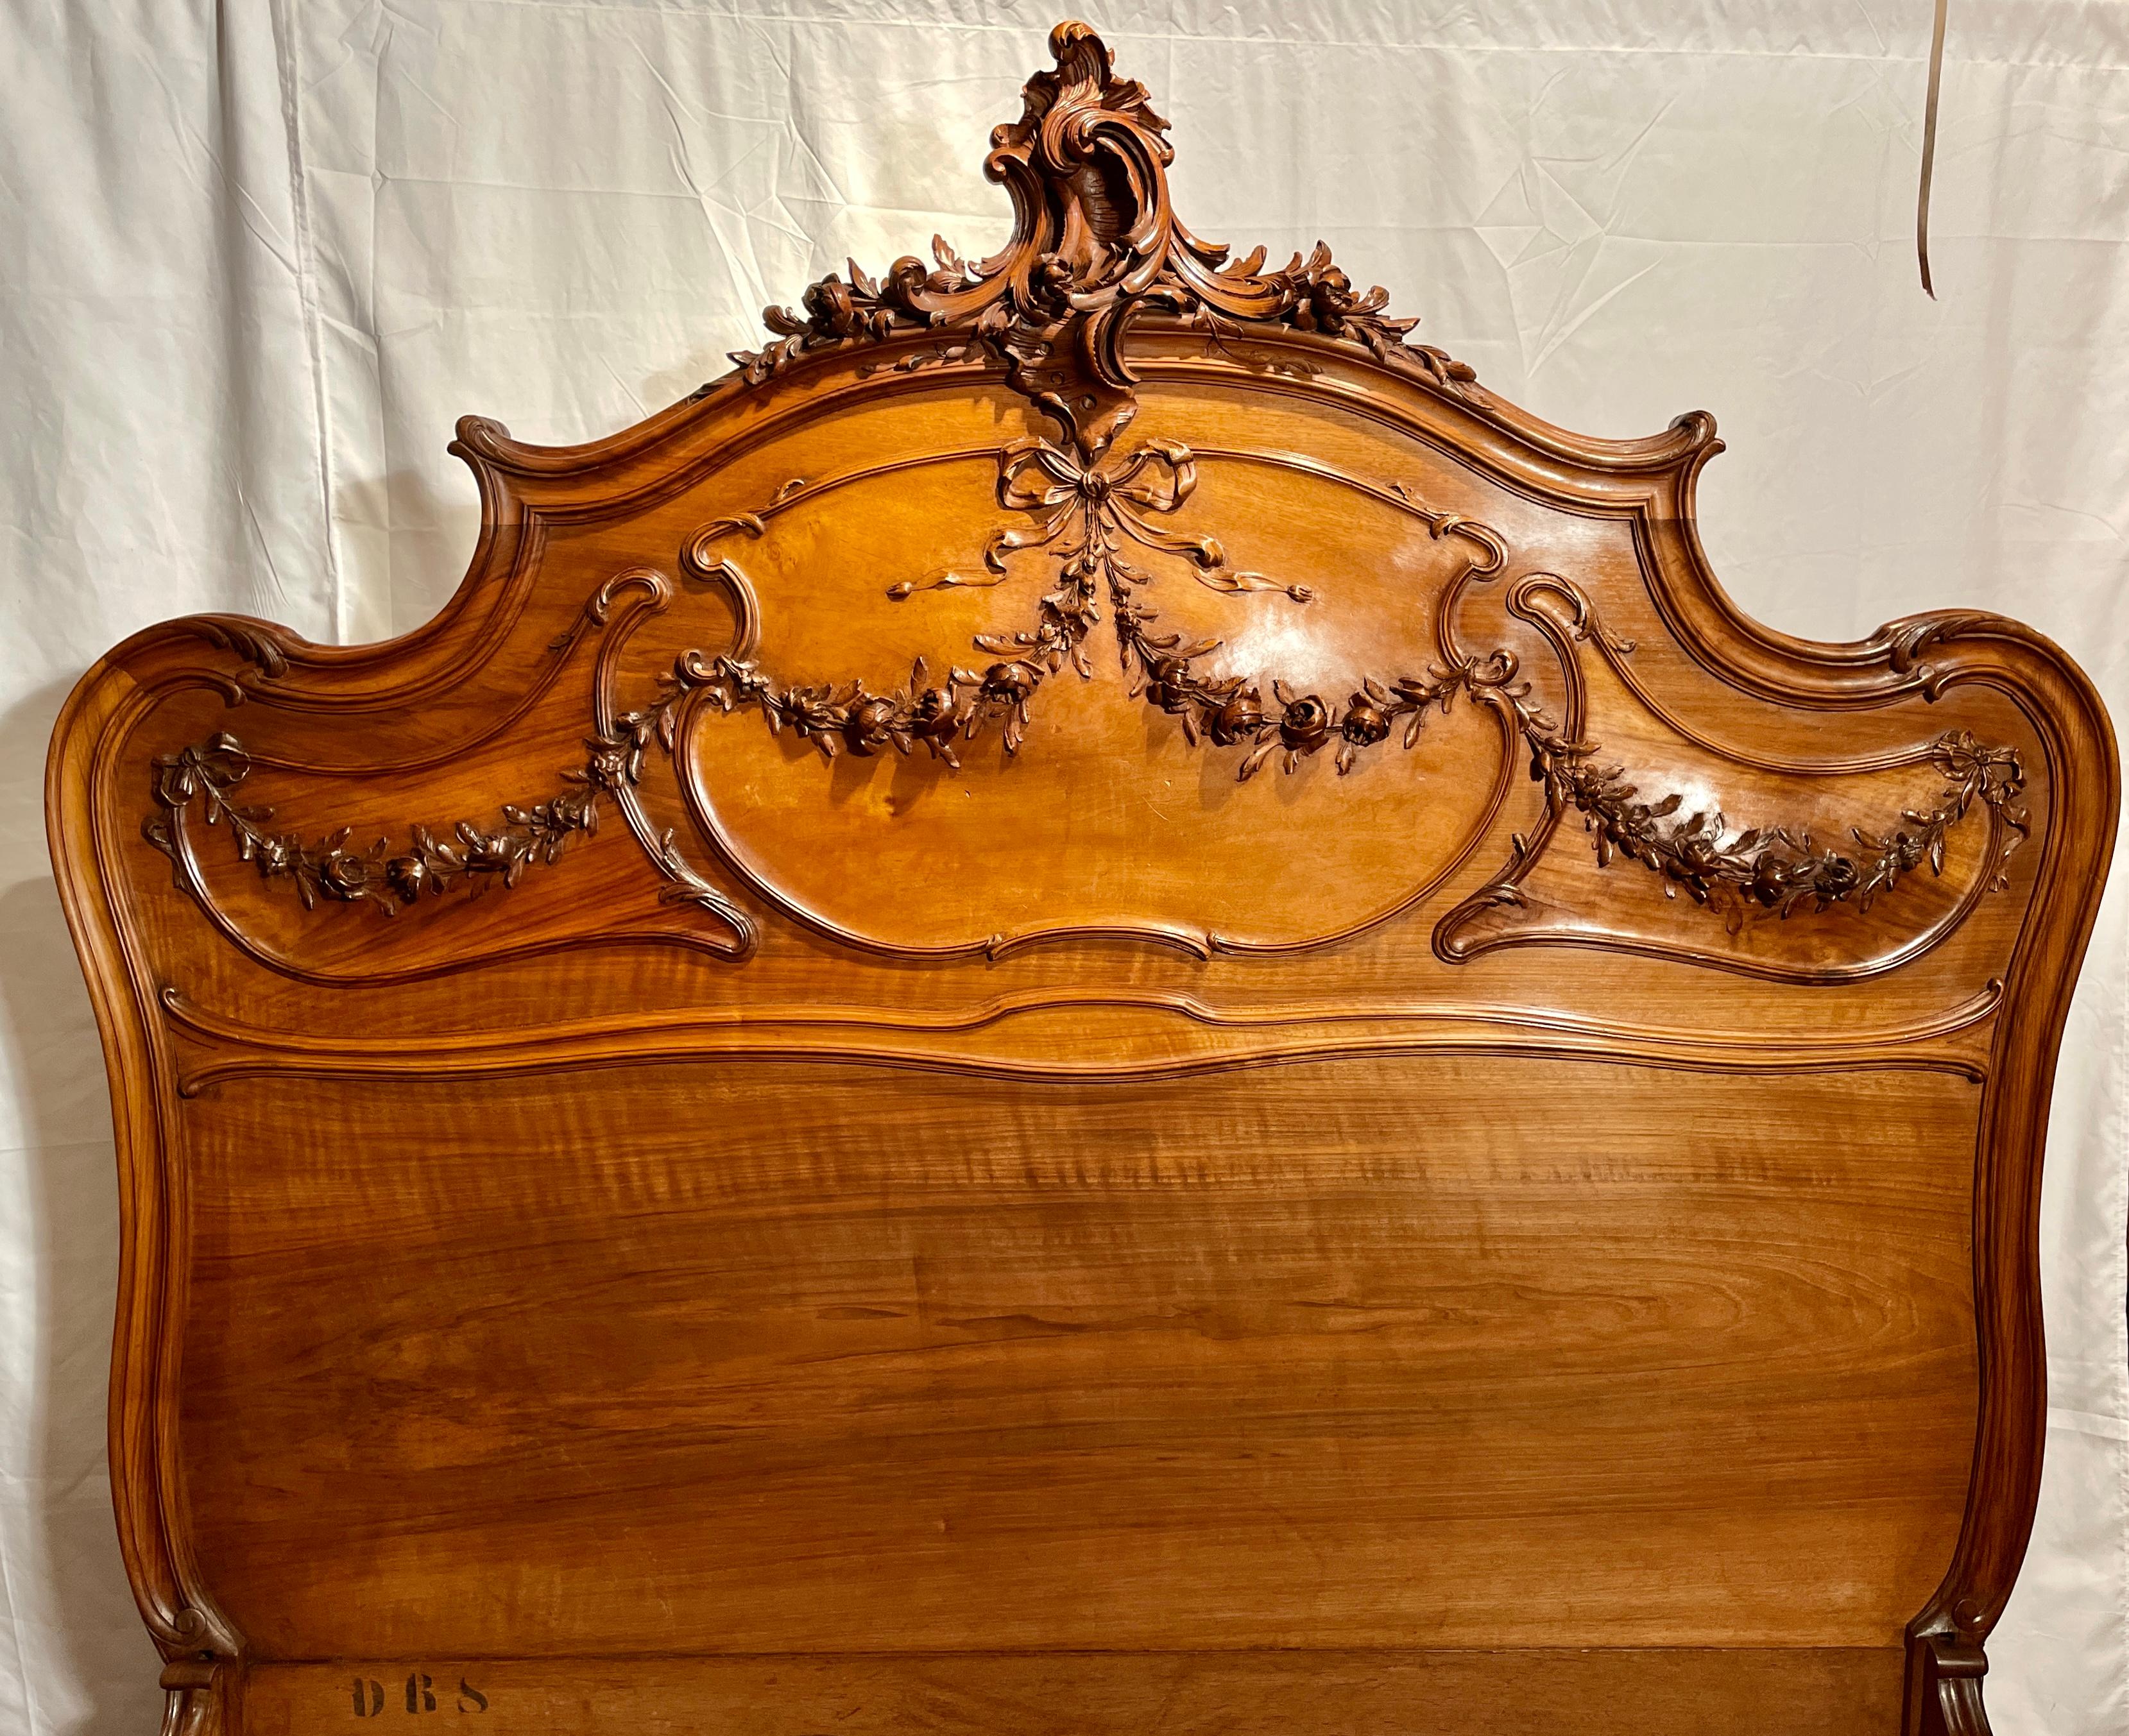 Antique French Louis XV 4 piece carved walnut bedroom suite signed Frédéric Schmit of Paris, Circa 1890. 
*Per last 3 photos the two nightstands have removeable tops.

Dimensions: 
Bed exterior: 66 inches high x 63 inches wide x 84 inches deep